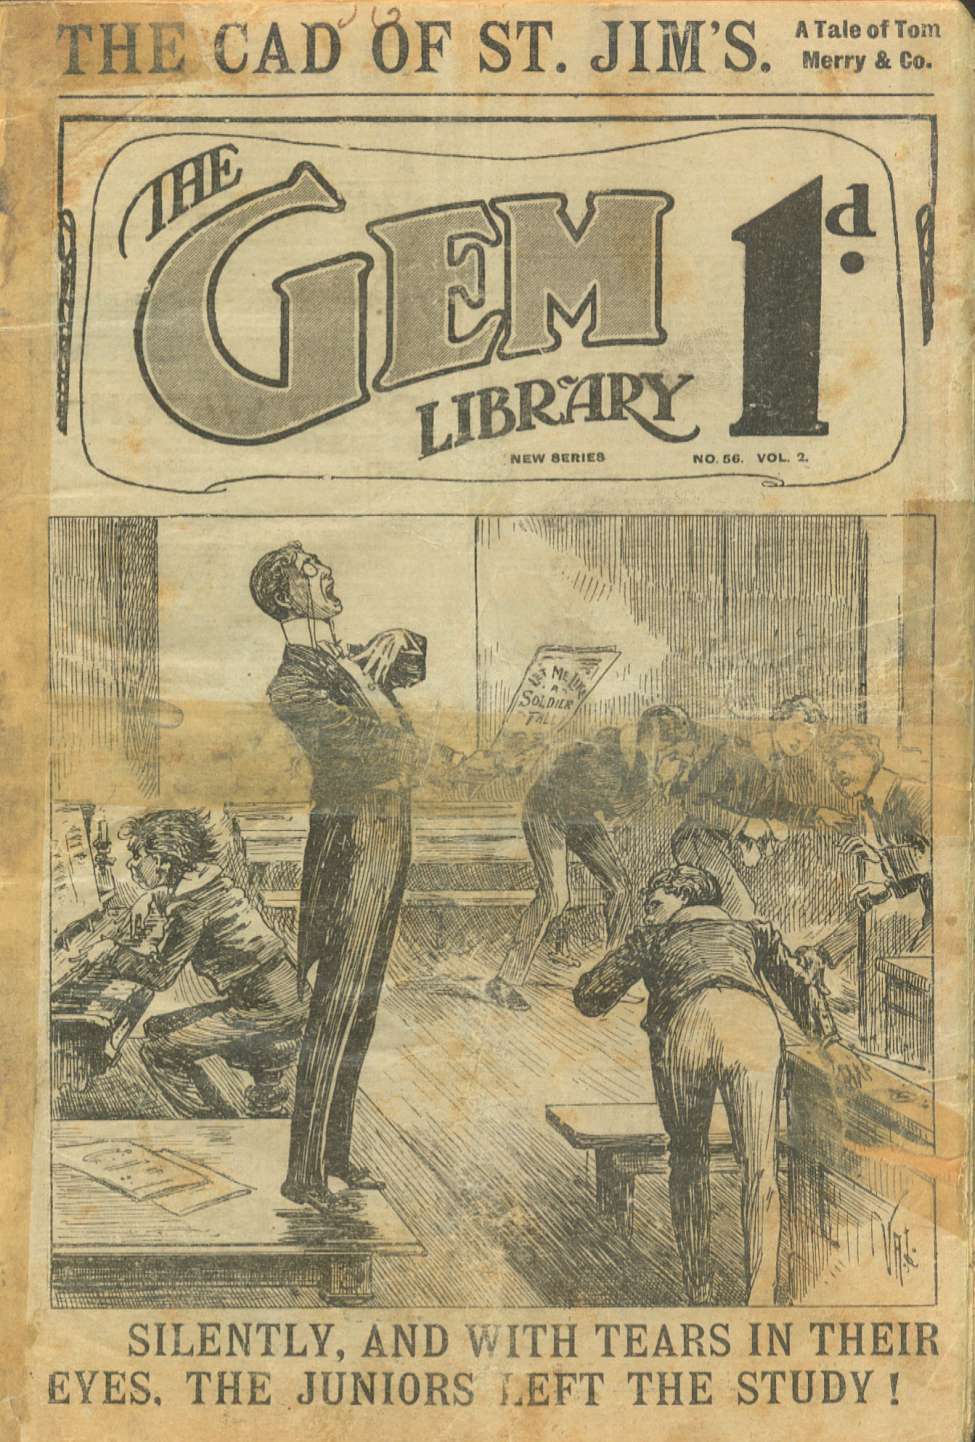 Book Cover For The Gem v2 56 - The Cad of St. Jim’s